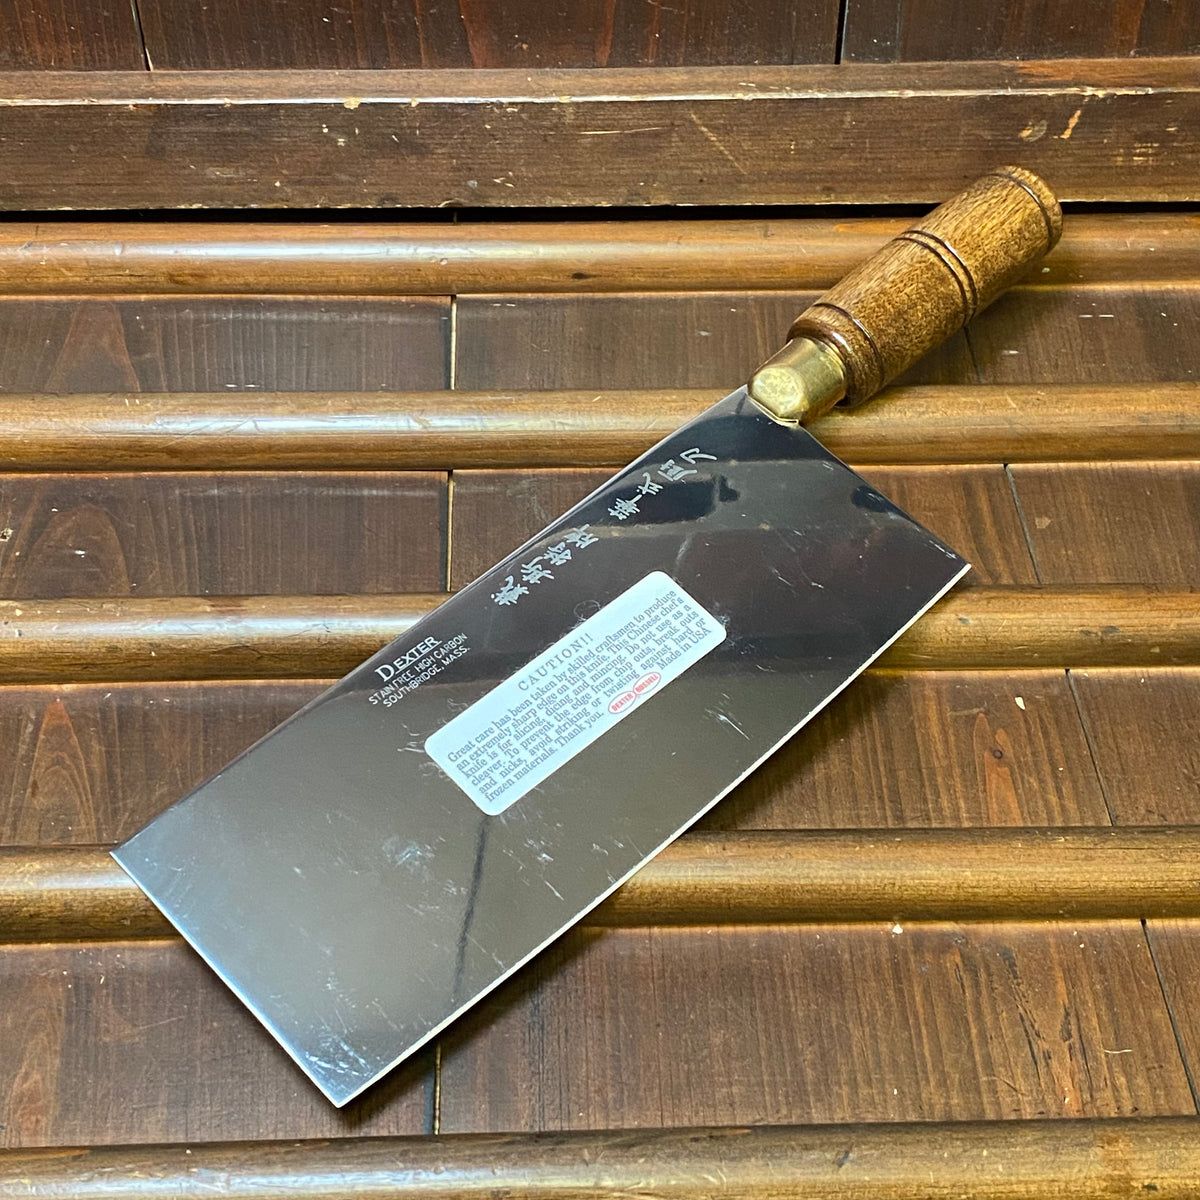 Dexter Russell 8" Chinese Cleaver Stainless